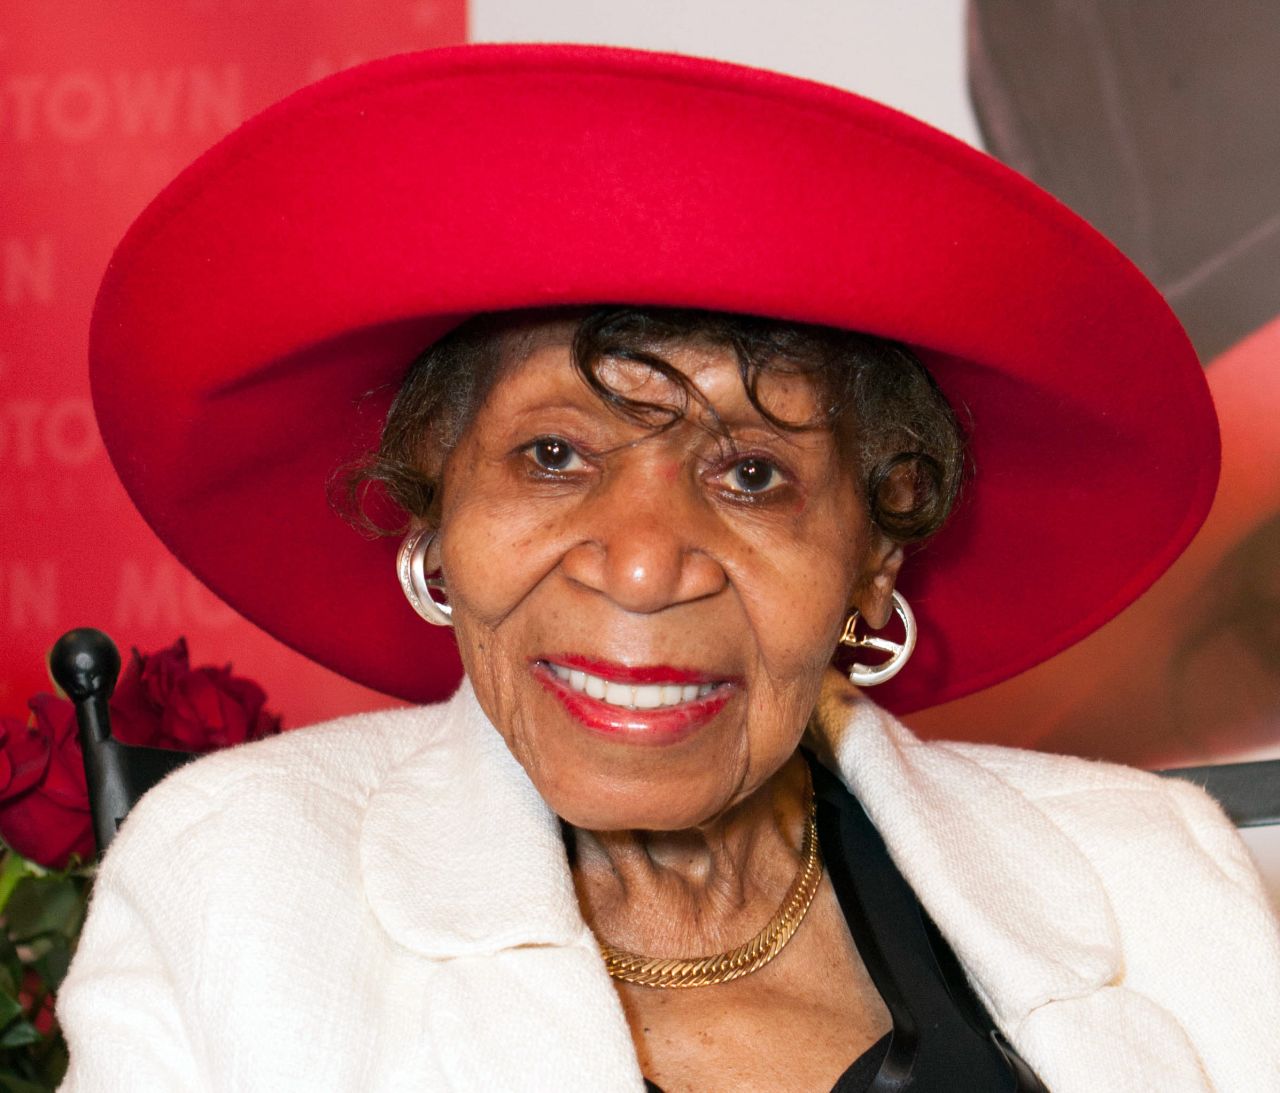 <a href="http://www.cnn.com/2013/10/14/showbiz/motown-mentor-powell-obit/">Maxine Powell</a>, who helped nurture the style of Motown artists such as Marvin Gaye and Diana Ross in the 1960s, died on October 14. The personal development coach for the legendary record label was 98.